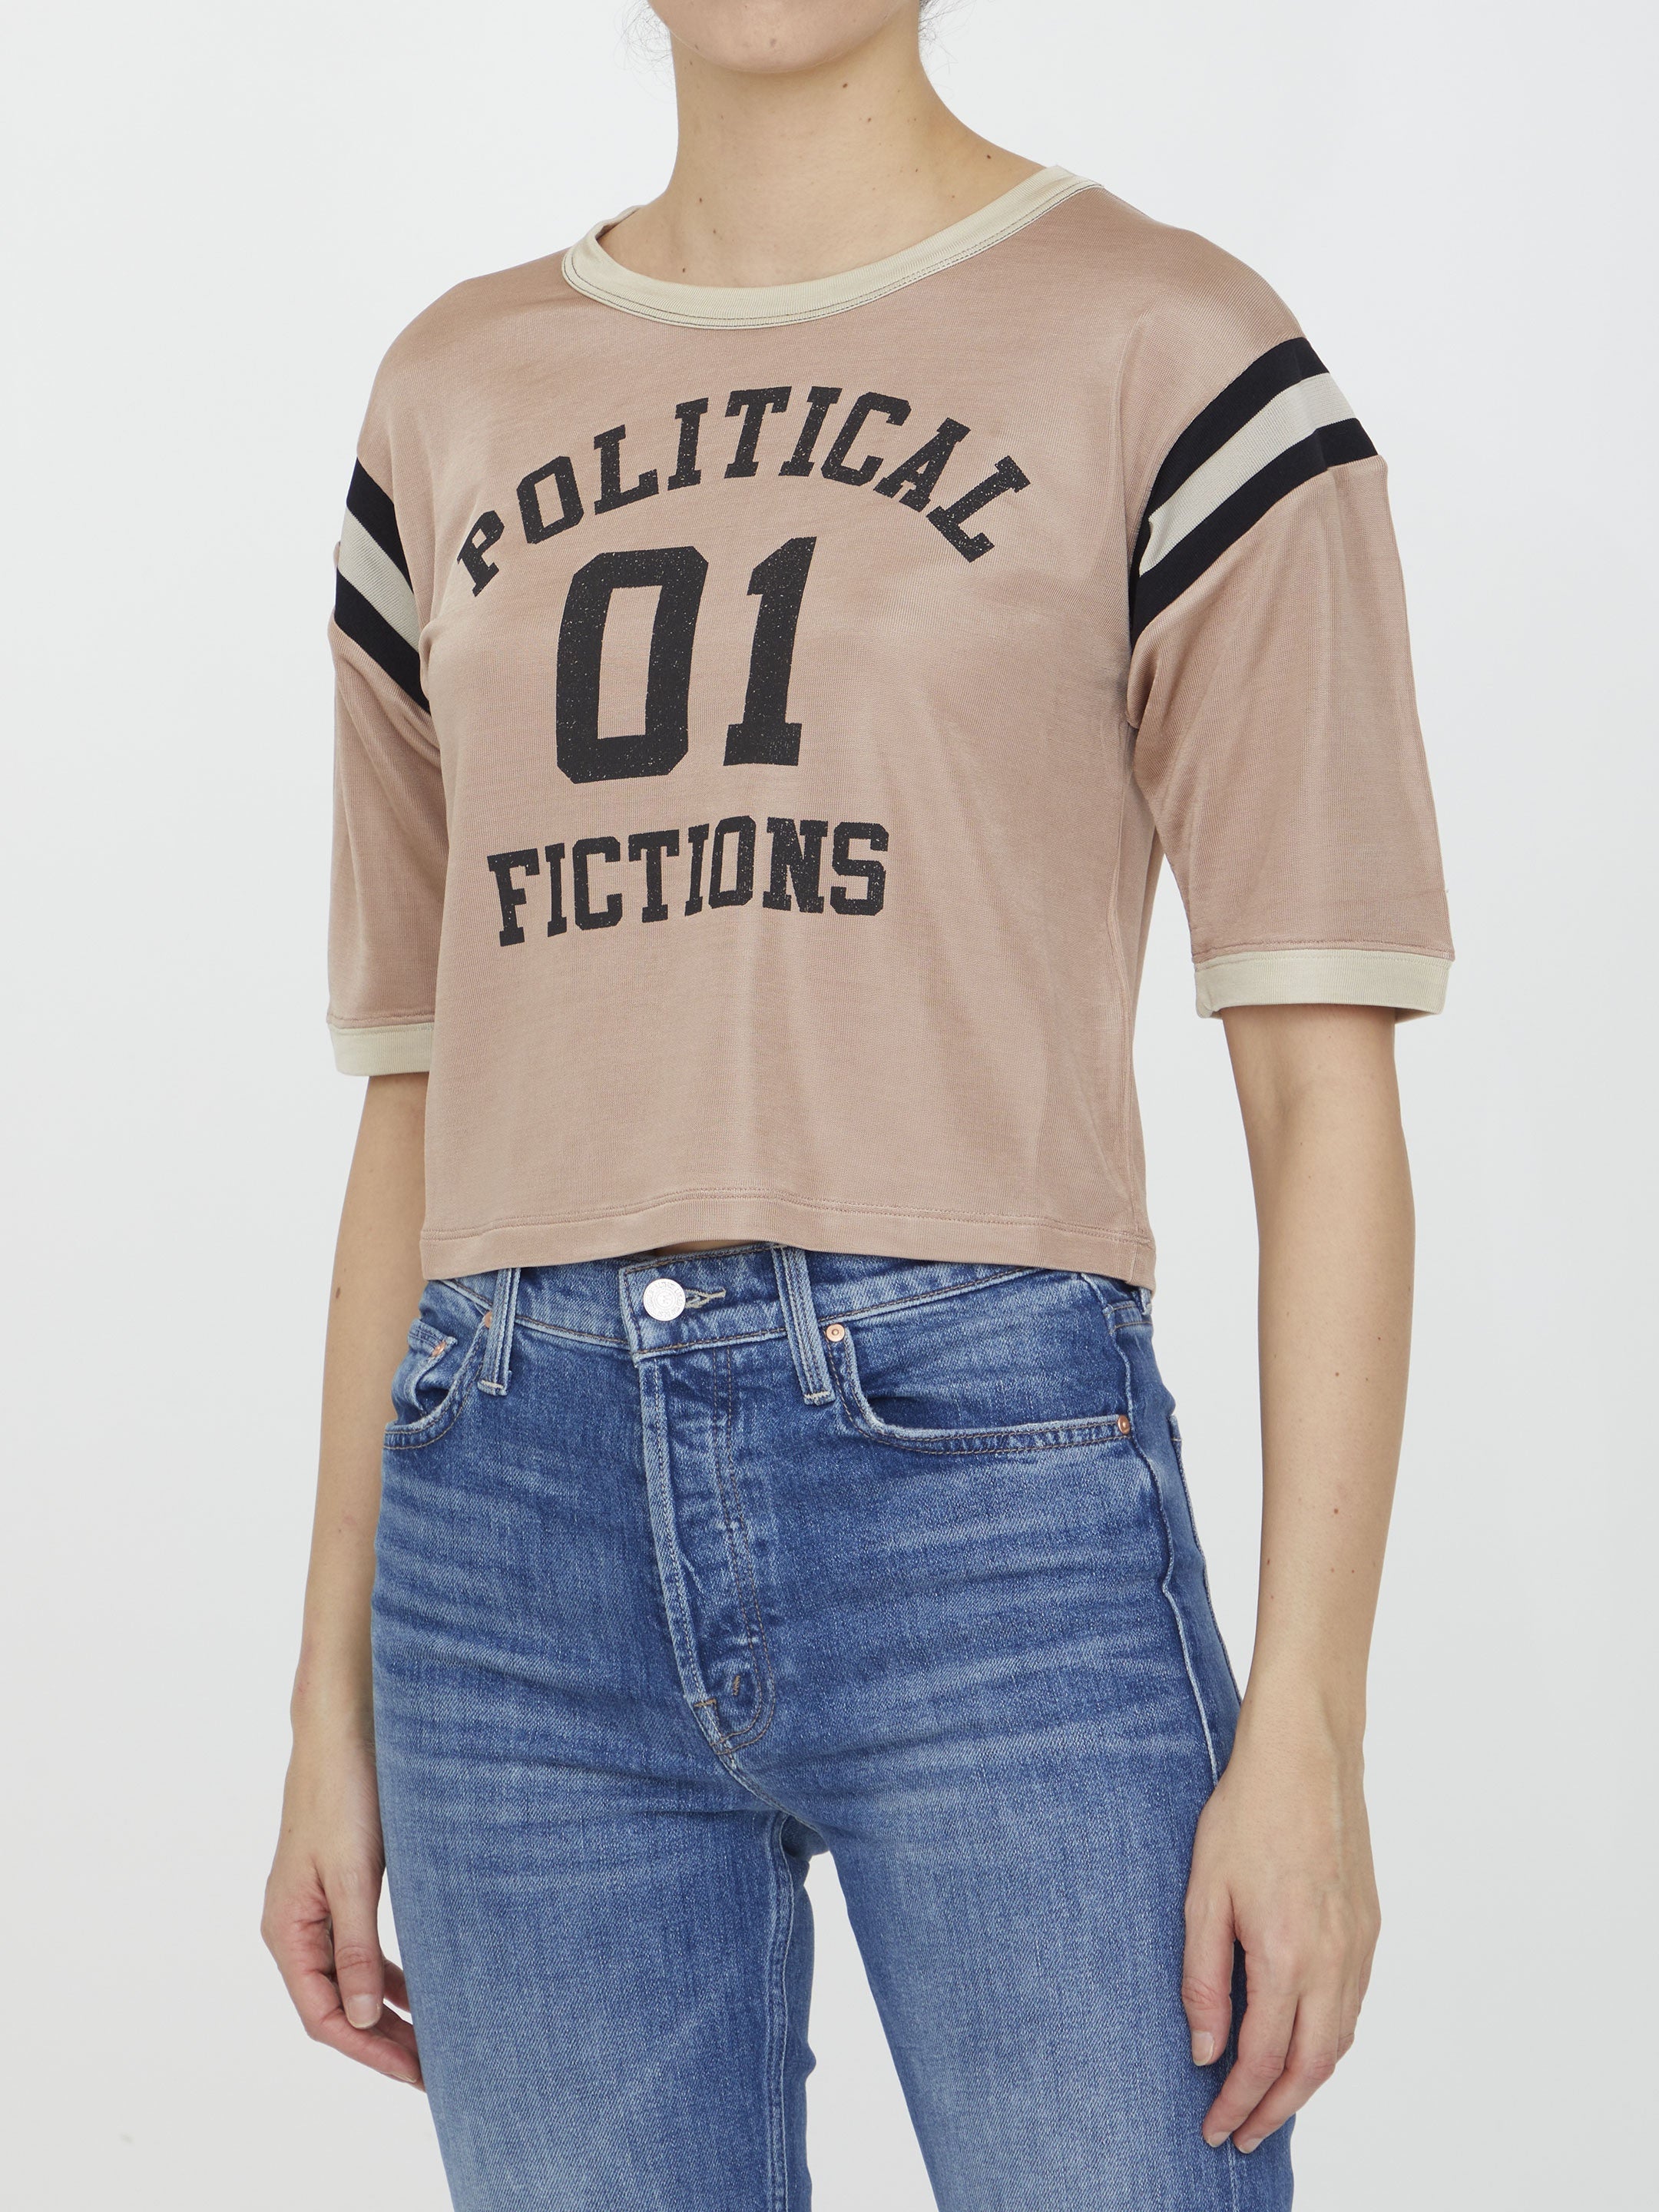 Political Fictions cropped t-shirt